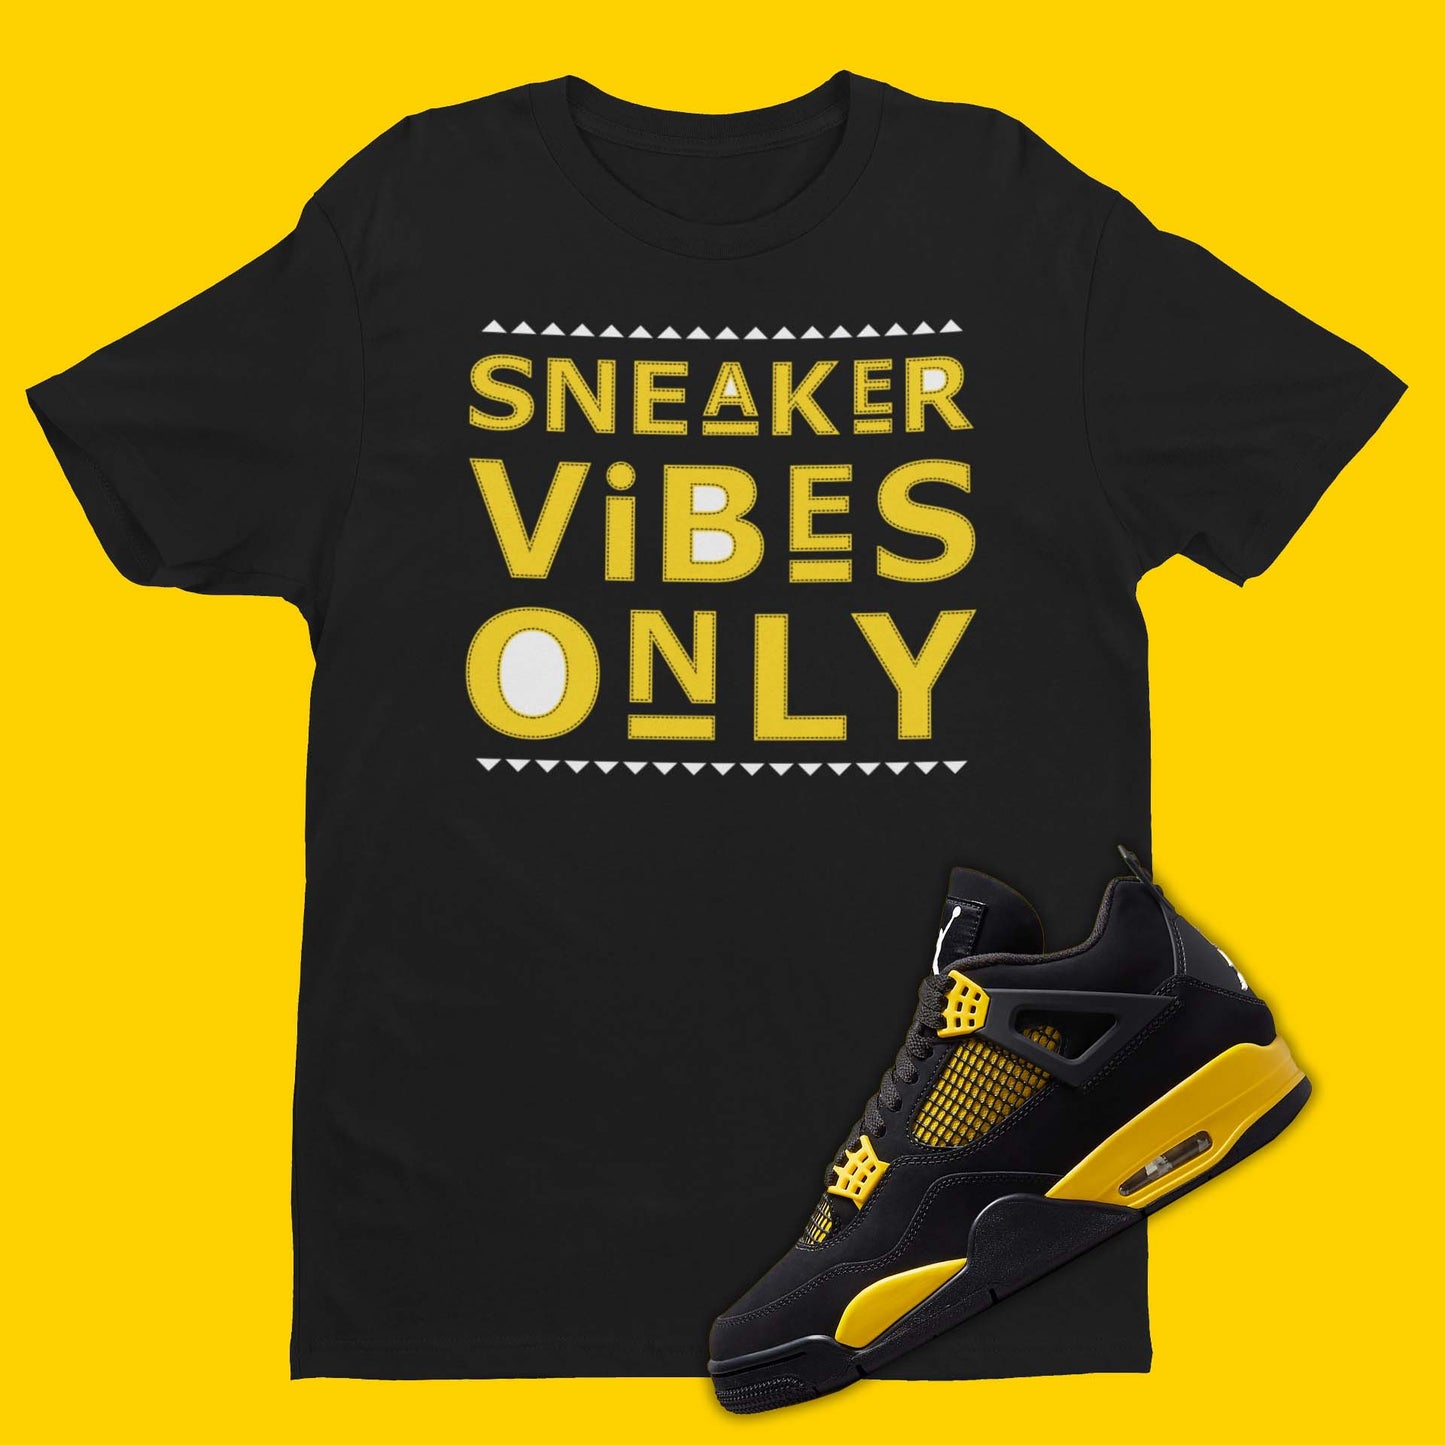 Martin TV Show crew neck black t-shirt with 'Sneaker Vibes Only' design inspired by Air Jordan 4 Thunder sneakers.